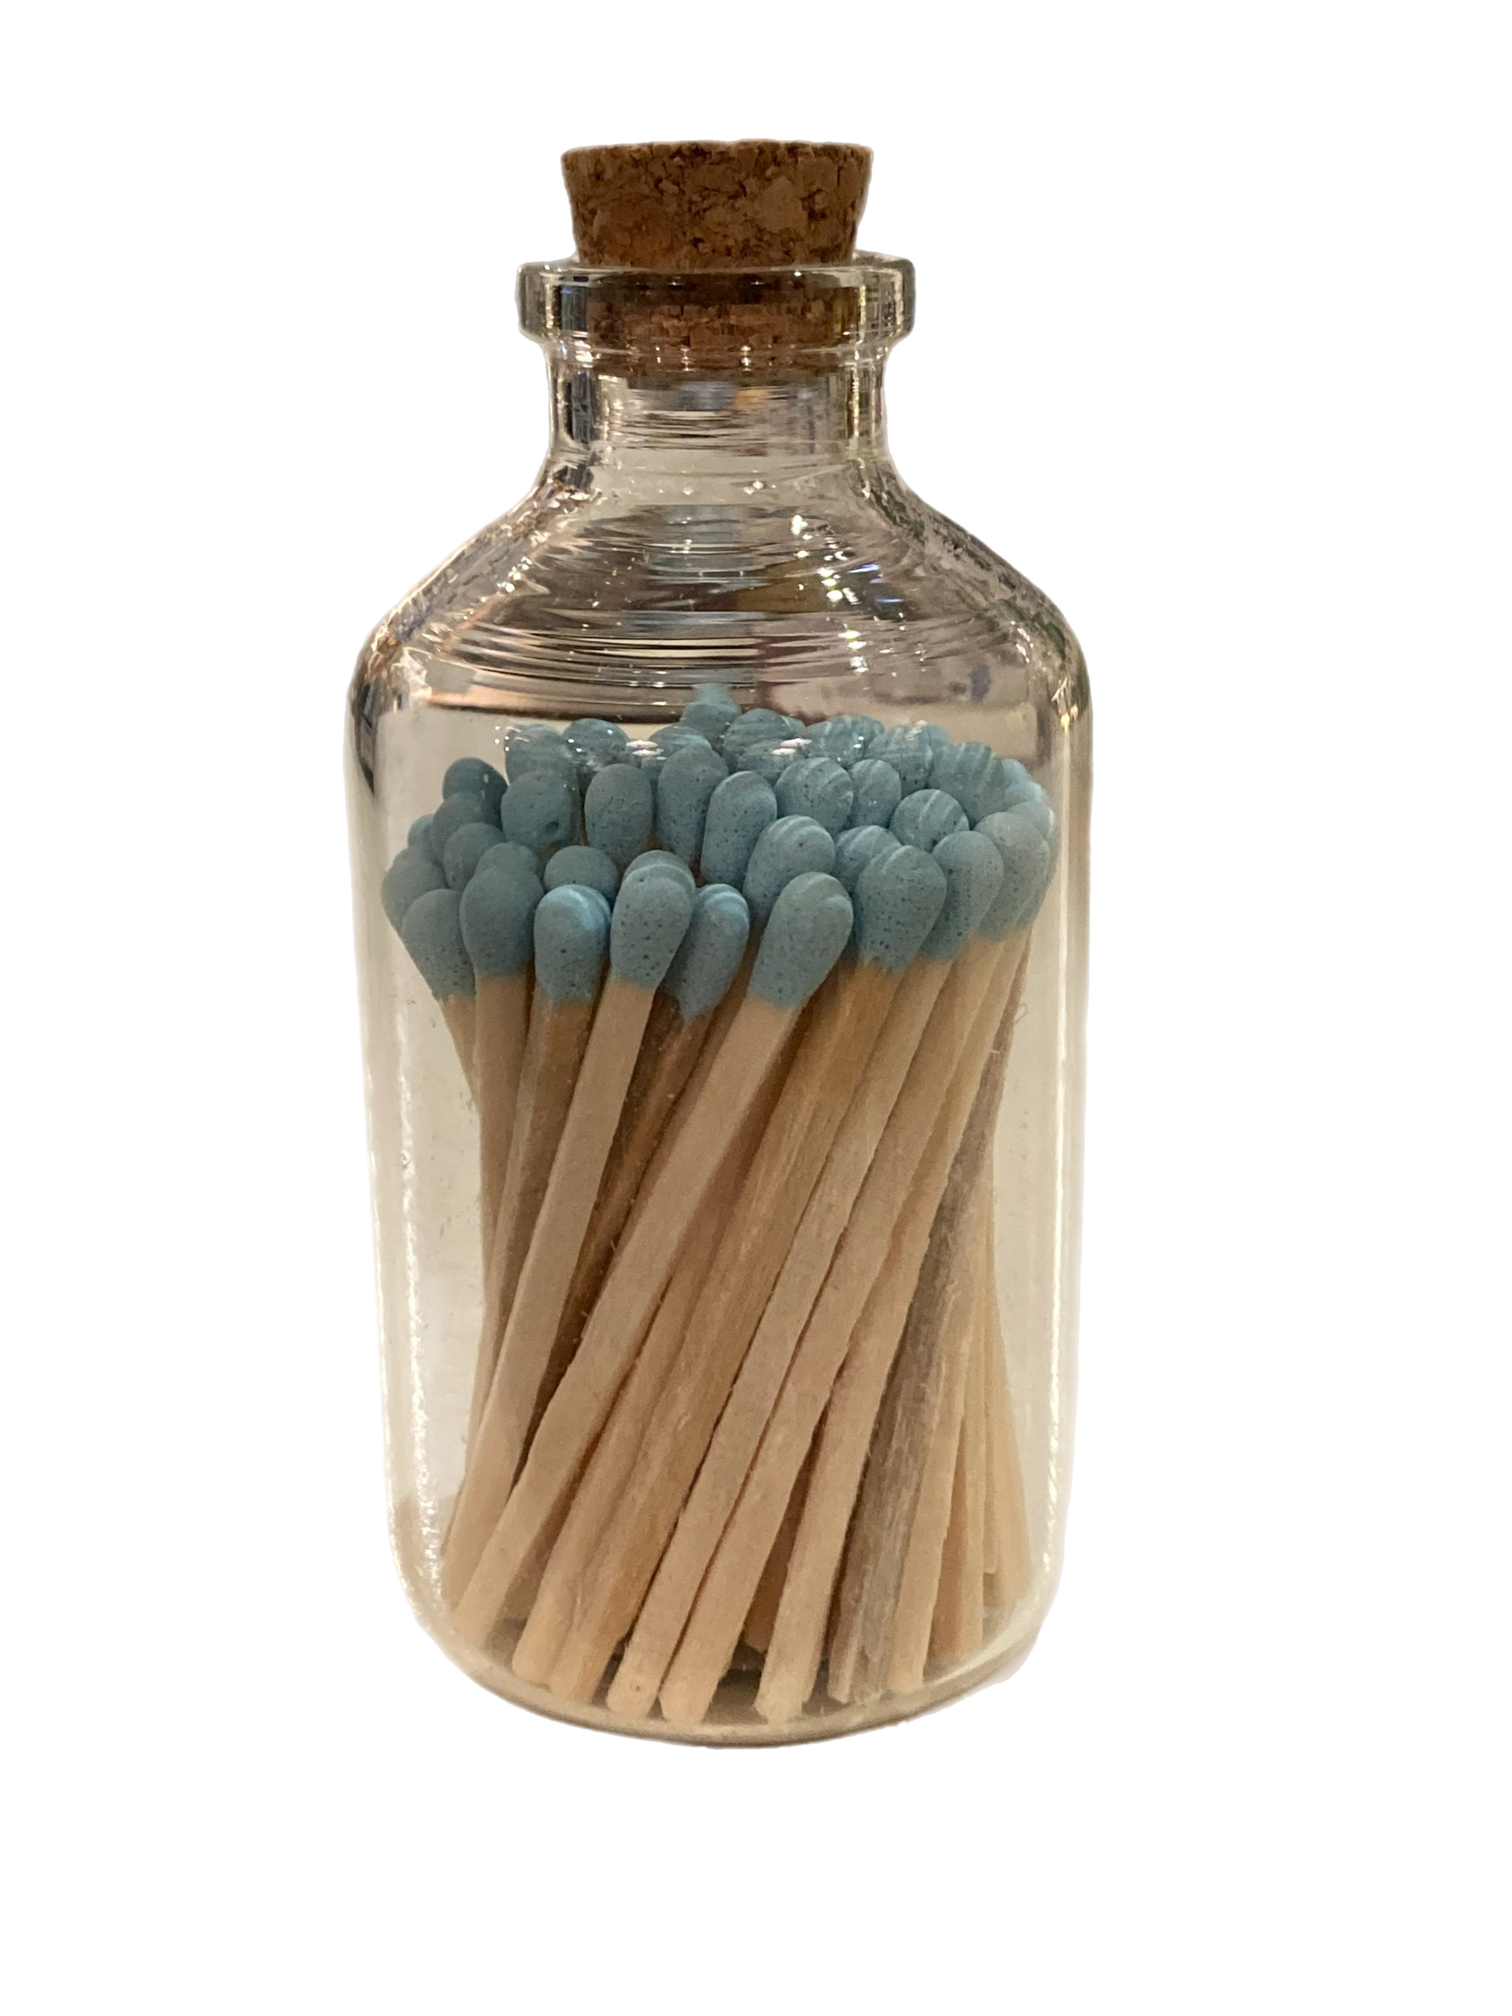 Teal Coloured Matches In Jar